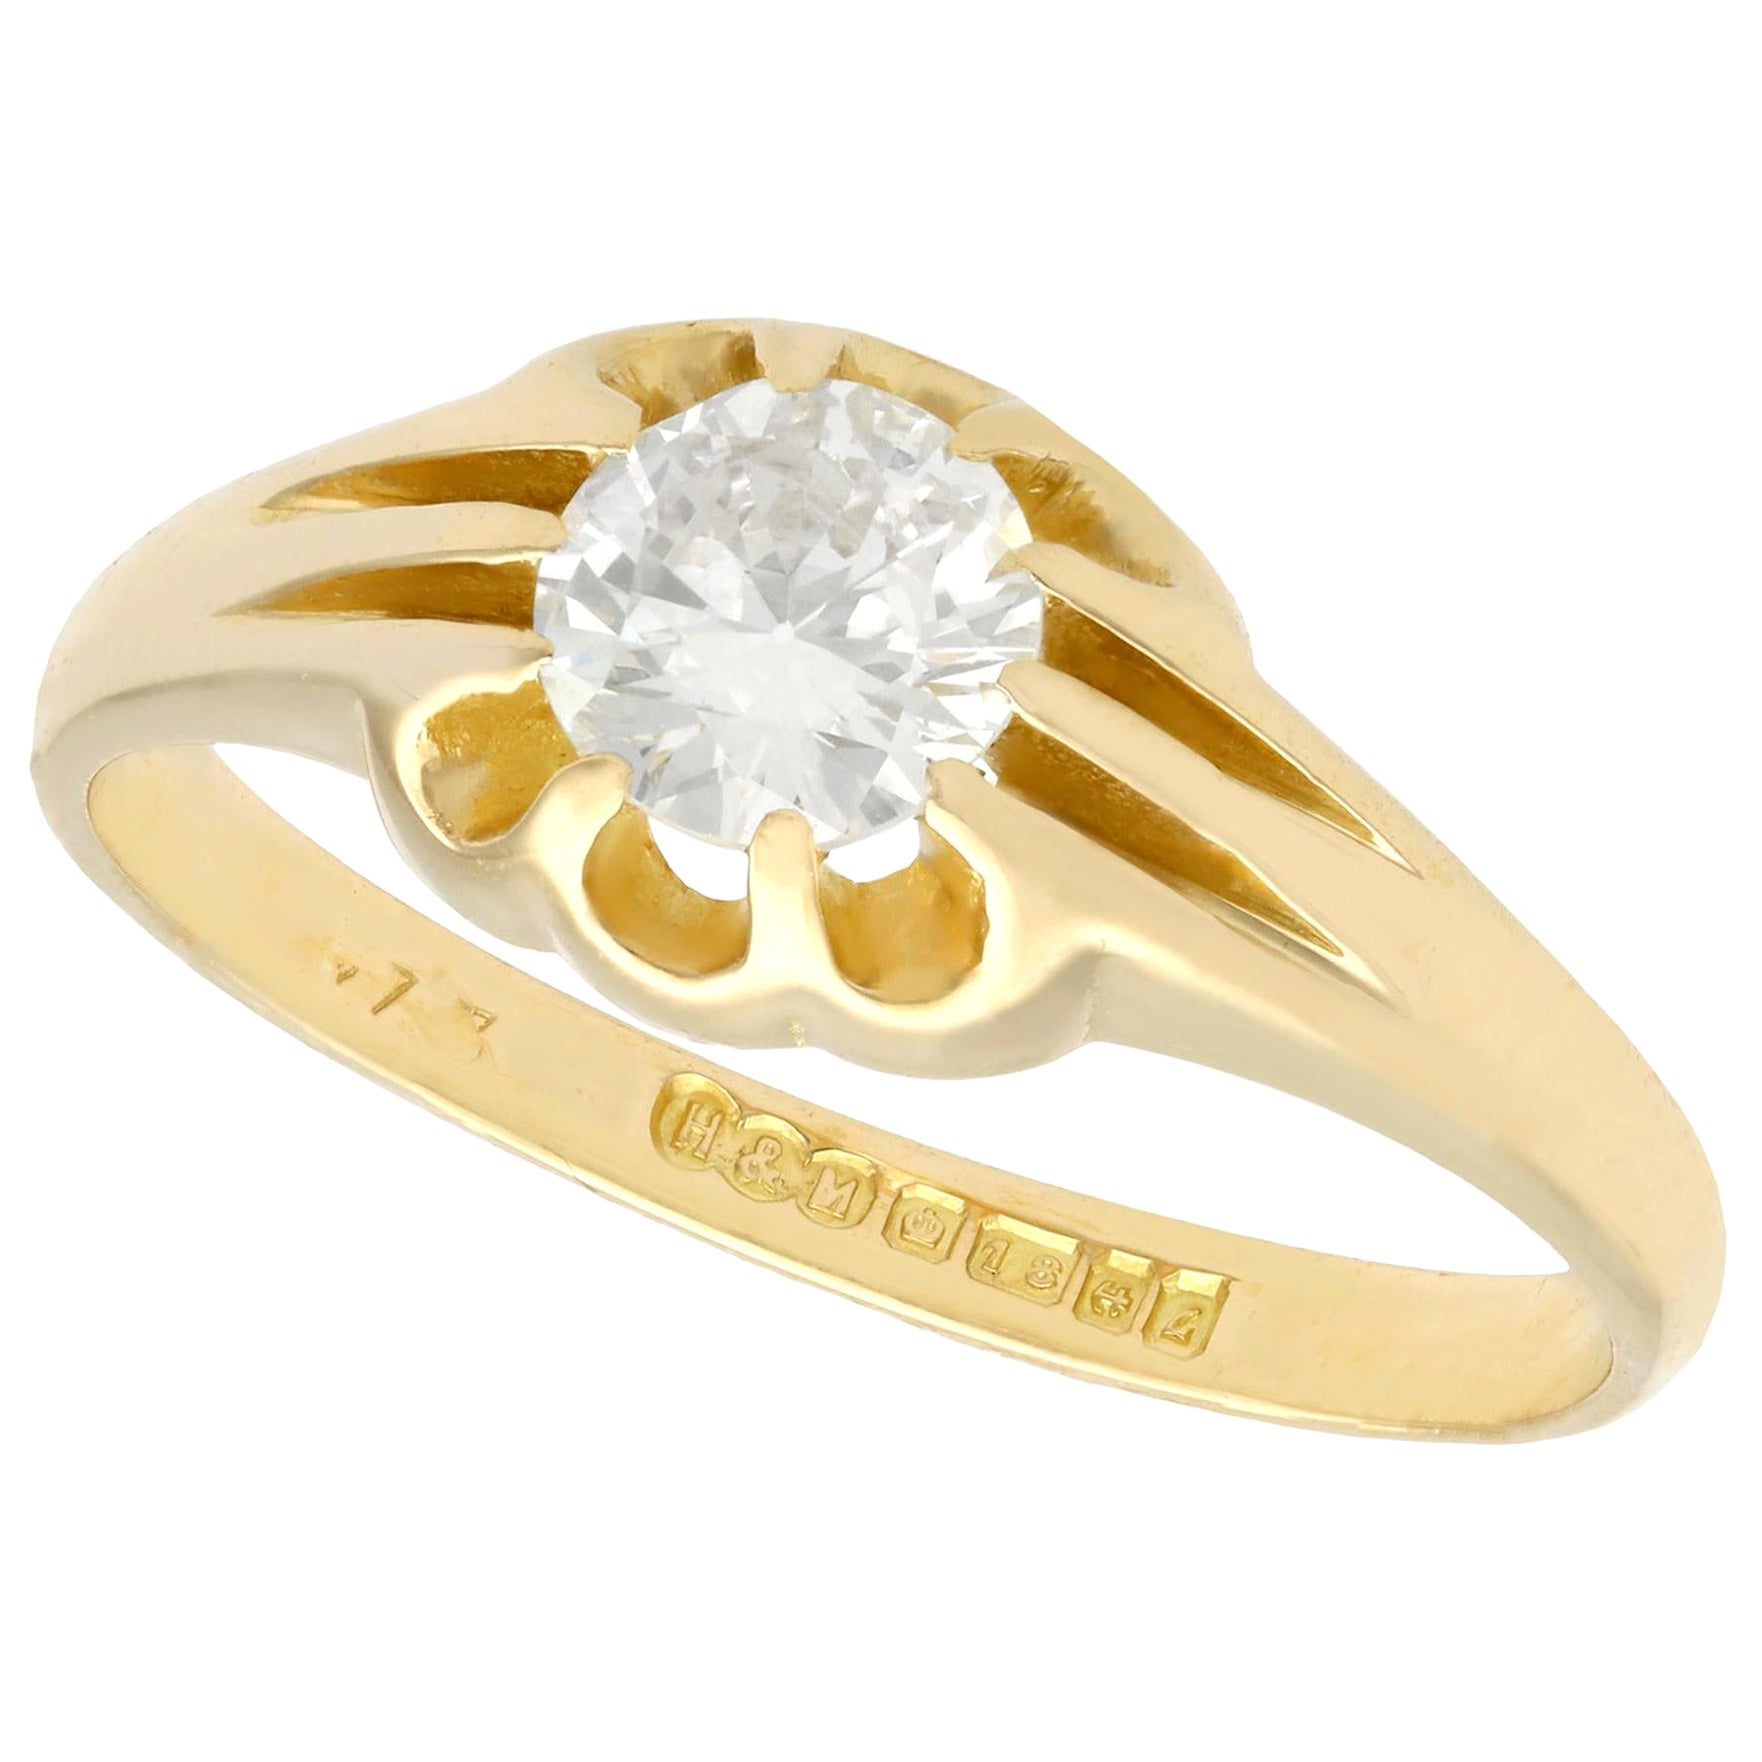 Diamond and Yellow Gold Solitaire Engagement Ring